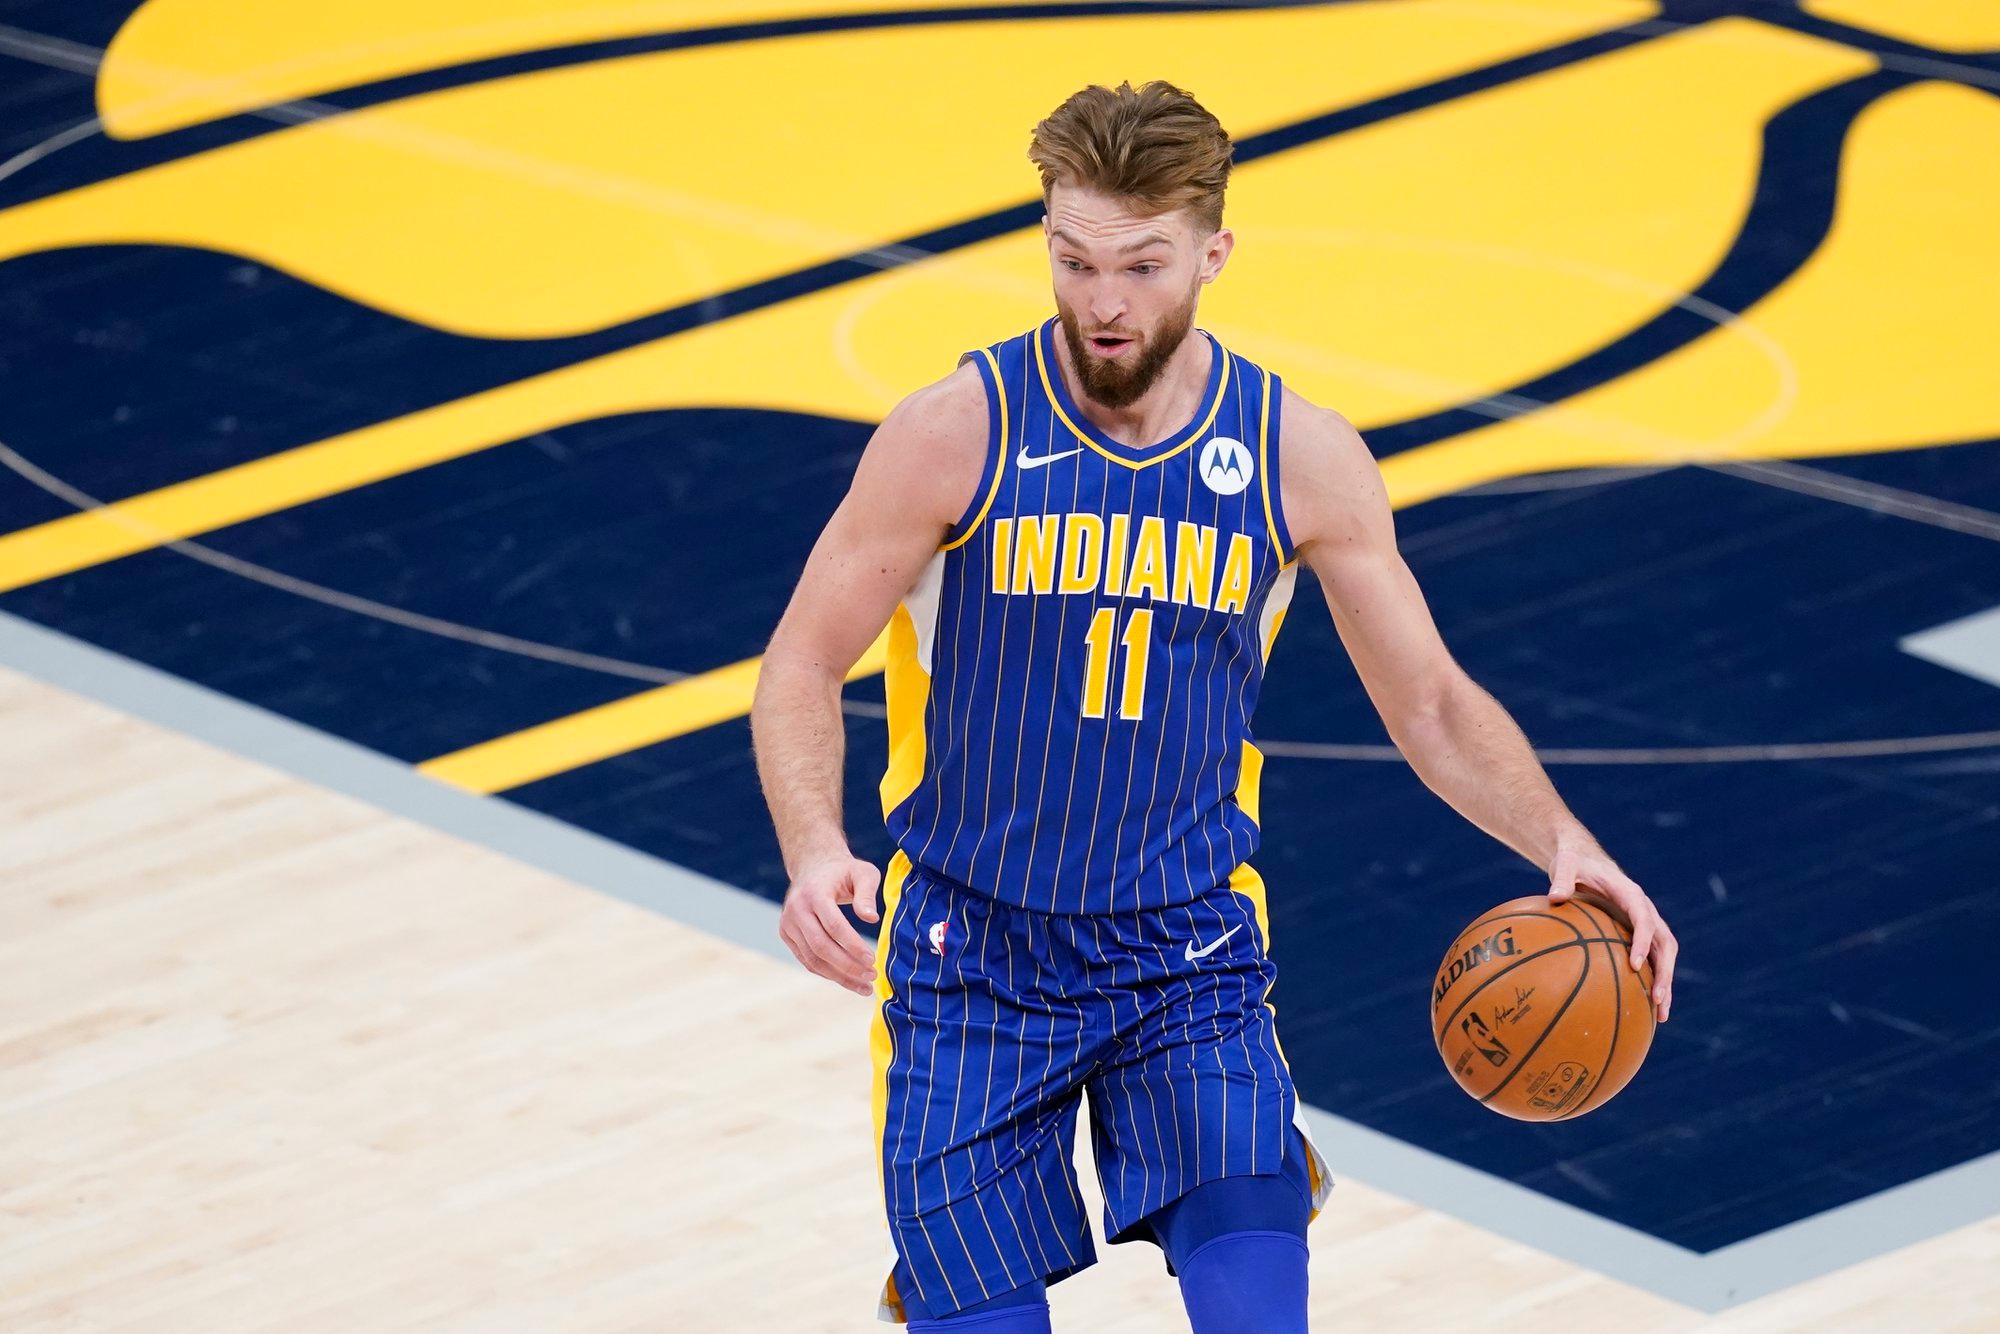 Indiana Pacers forward Domantas Sabonis (11) dribbles during the first half of an NBA basketball game against the Denver Nuggets, Thursday, March 4, 2021, in Indianapolis. (AP Photo/Darron Cummings)